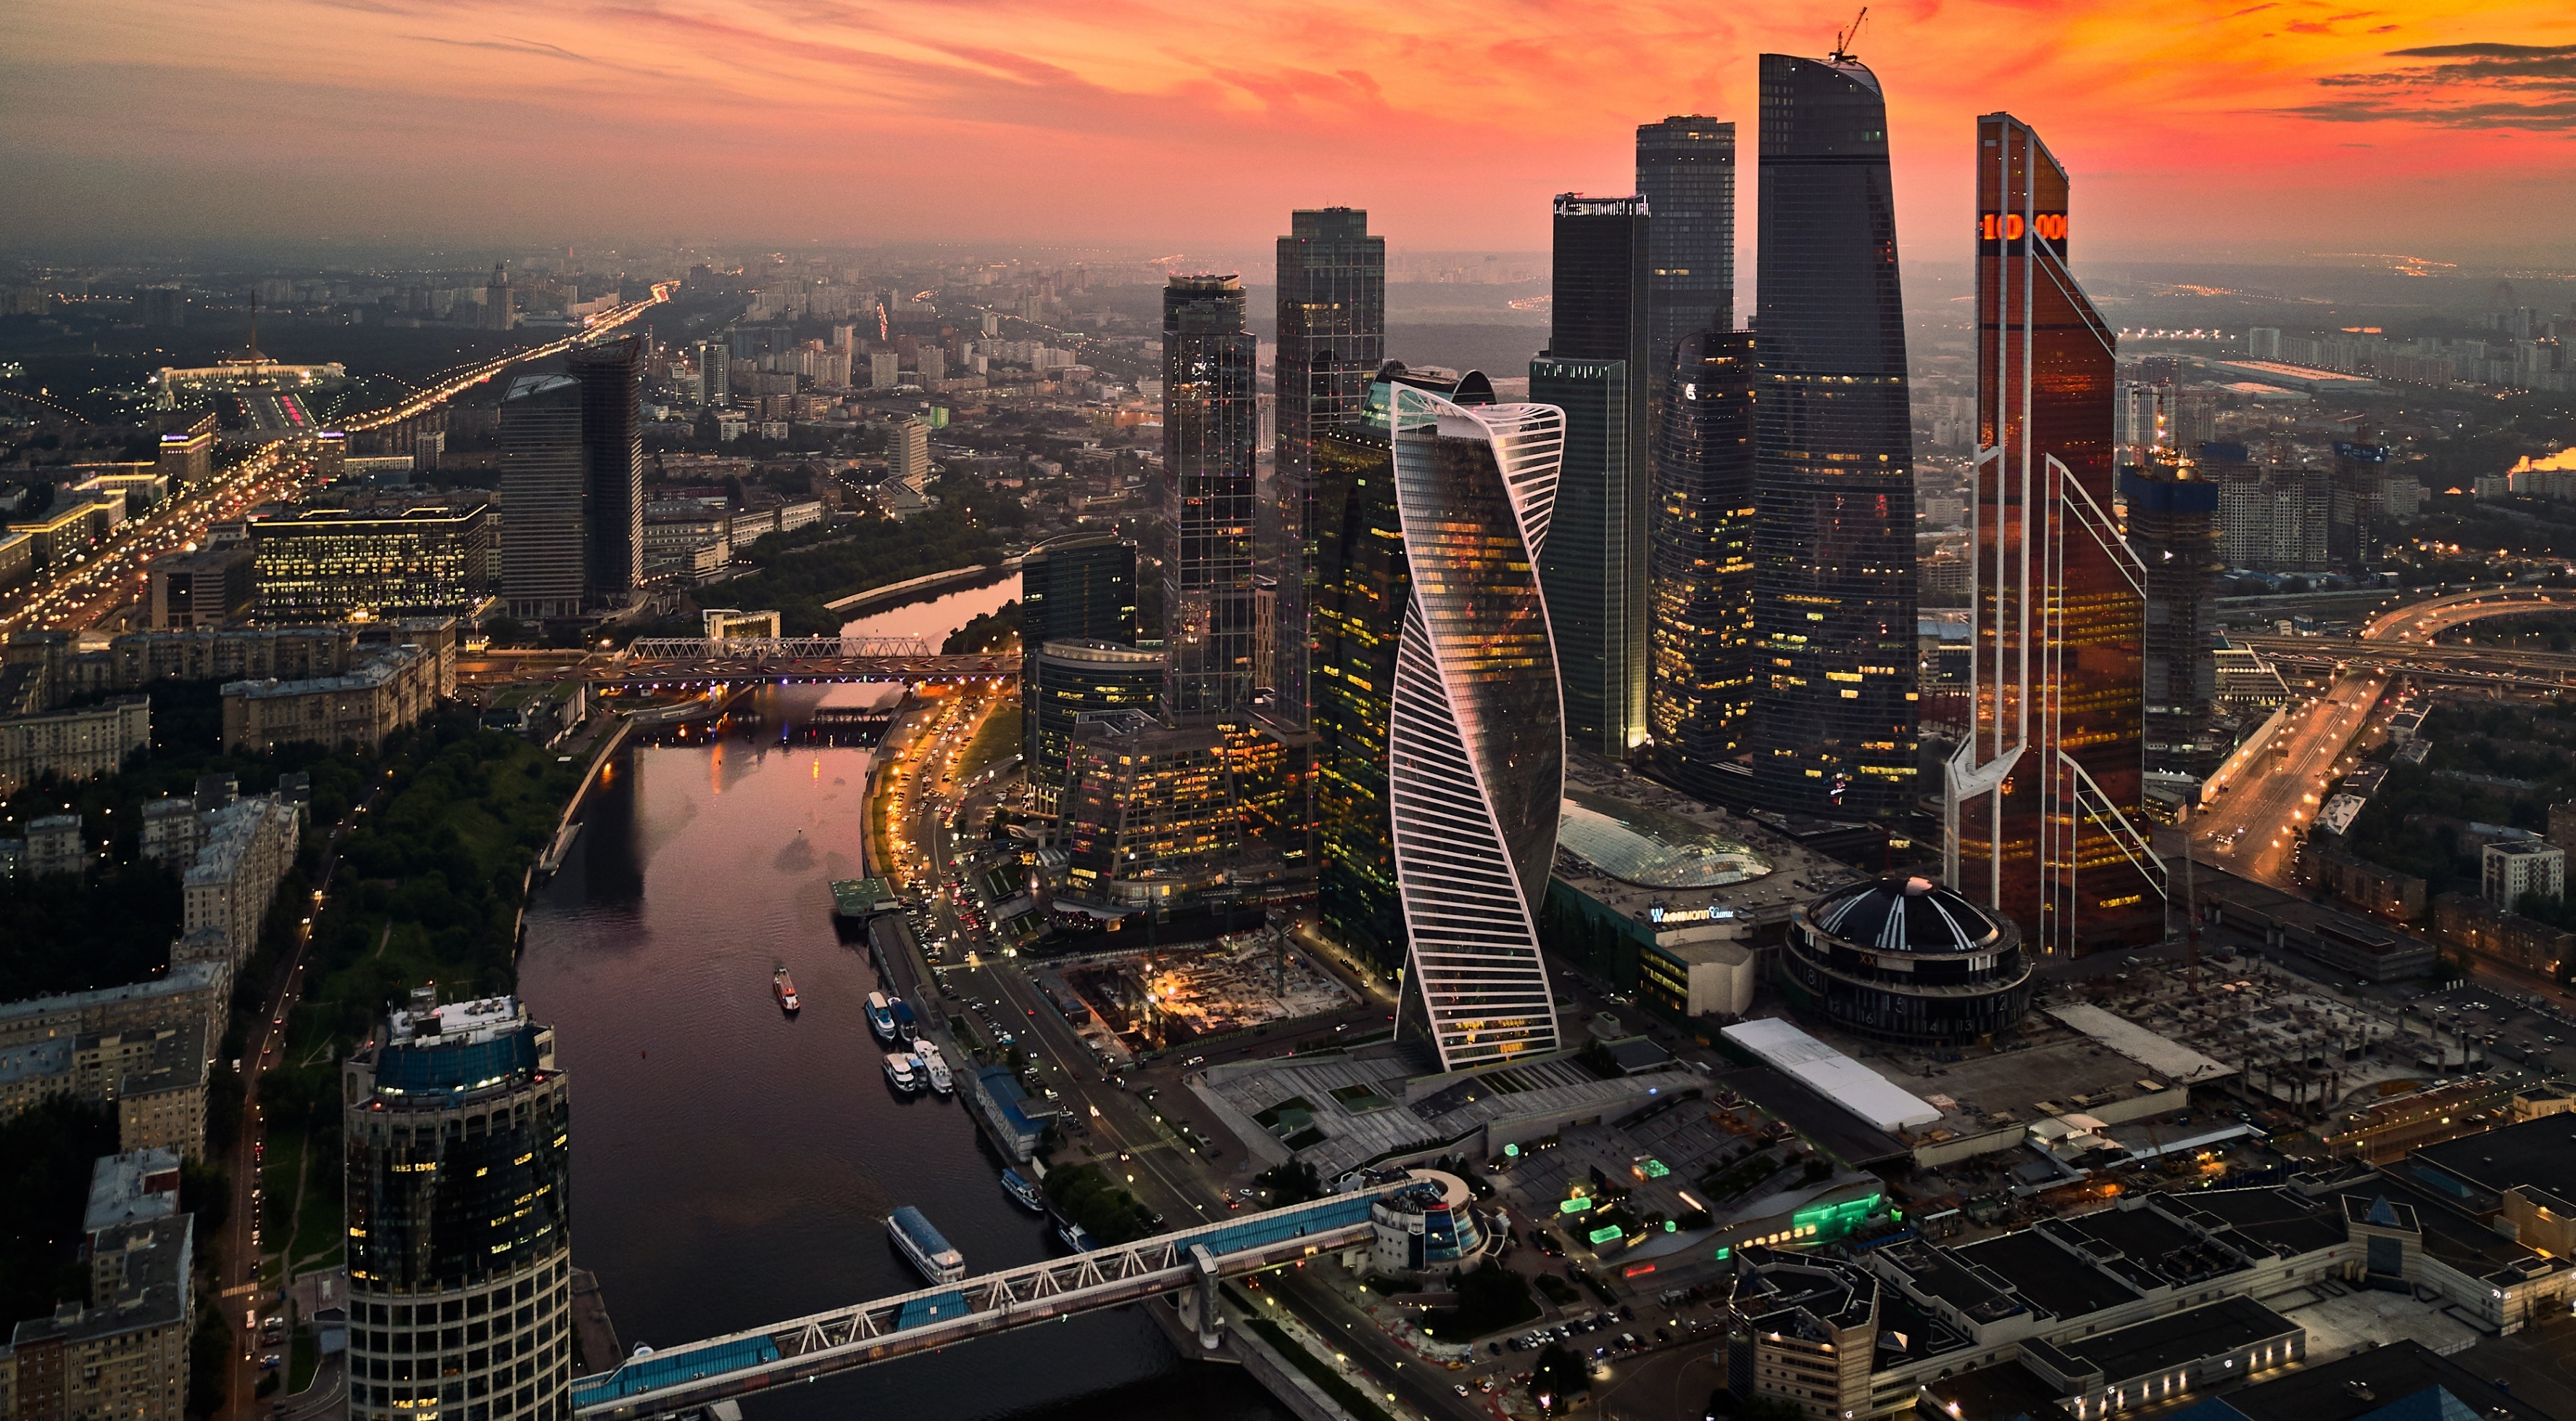 Moscow City Hd - Moscow City Wallpaper Hd , HD Wallpaper & Backgrounds